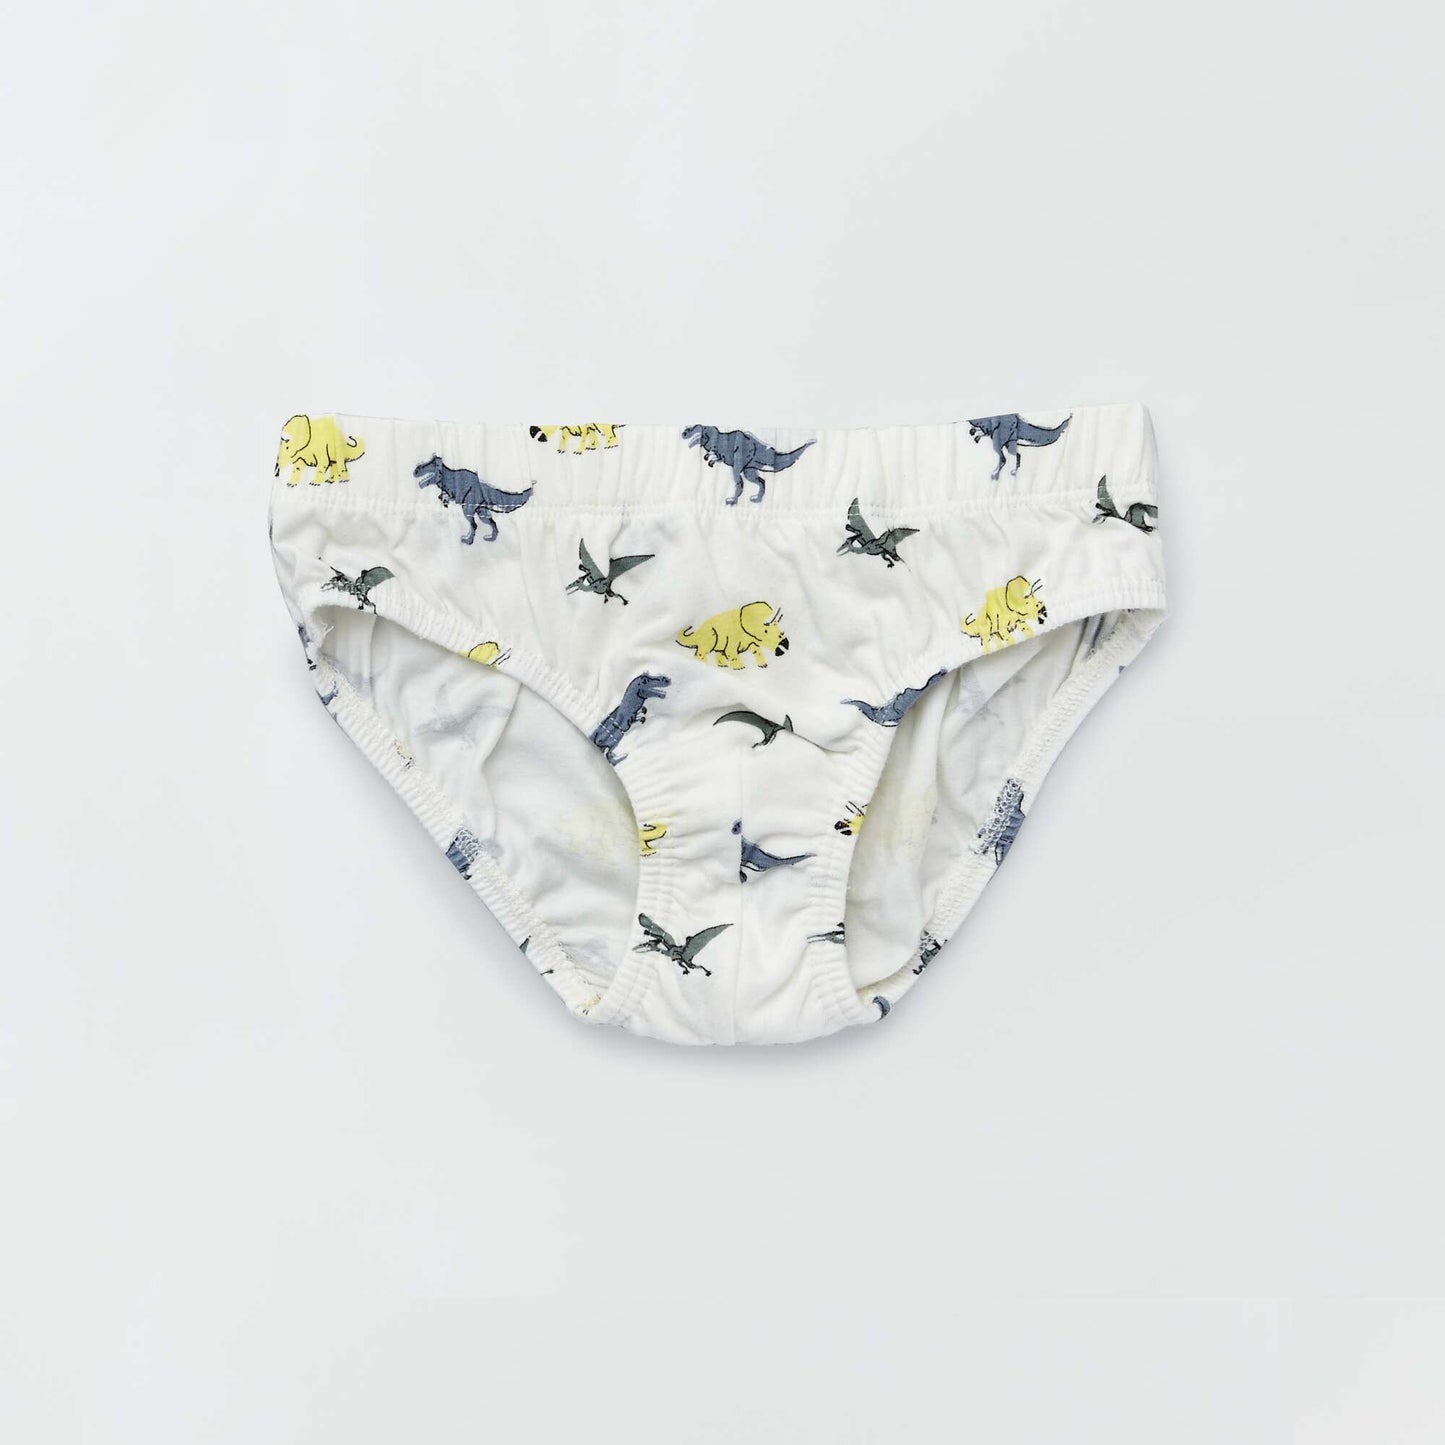 Pack of 5 pairs of cotton briefs BLUE